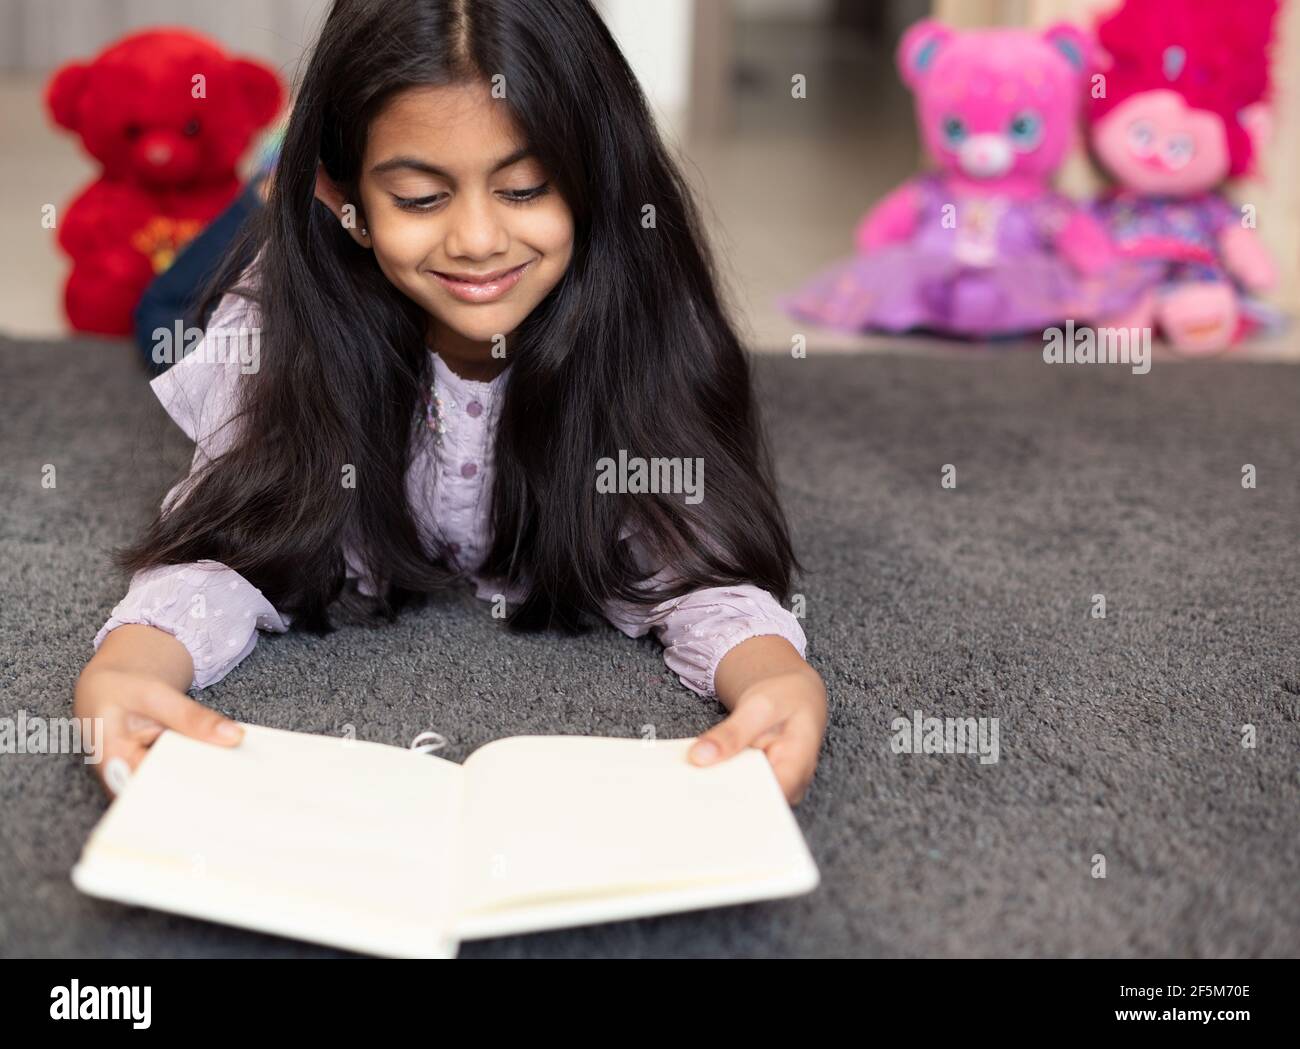 Portrait of a cute Indian school girl relaxing on a play mat, smiling and reading a diary book surrounded by toys. Stock Photo